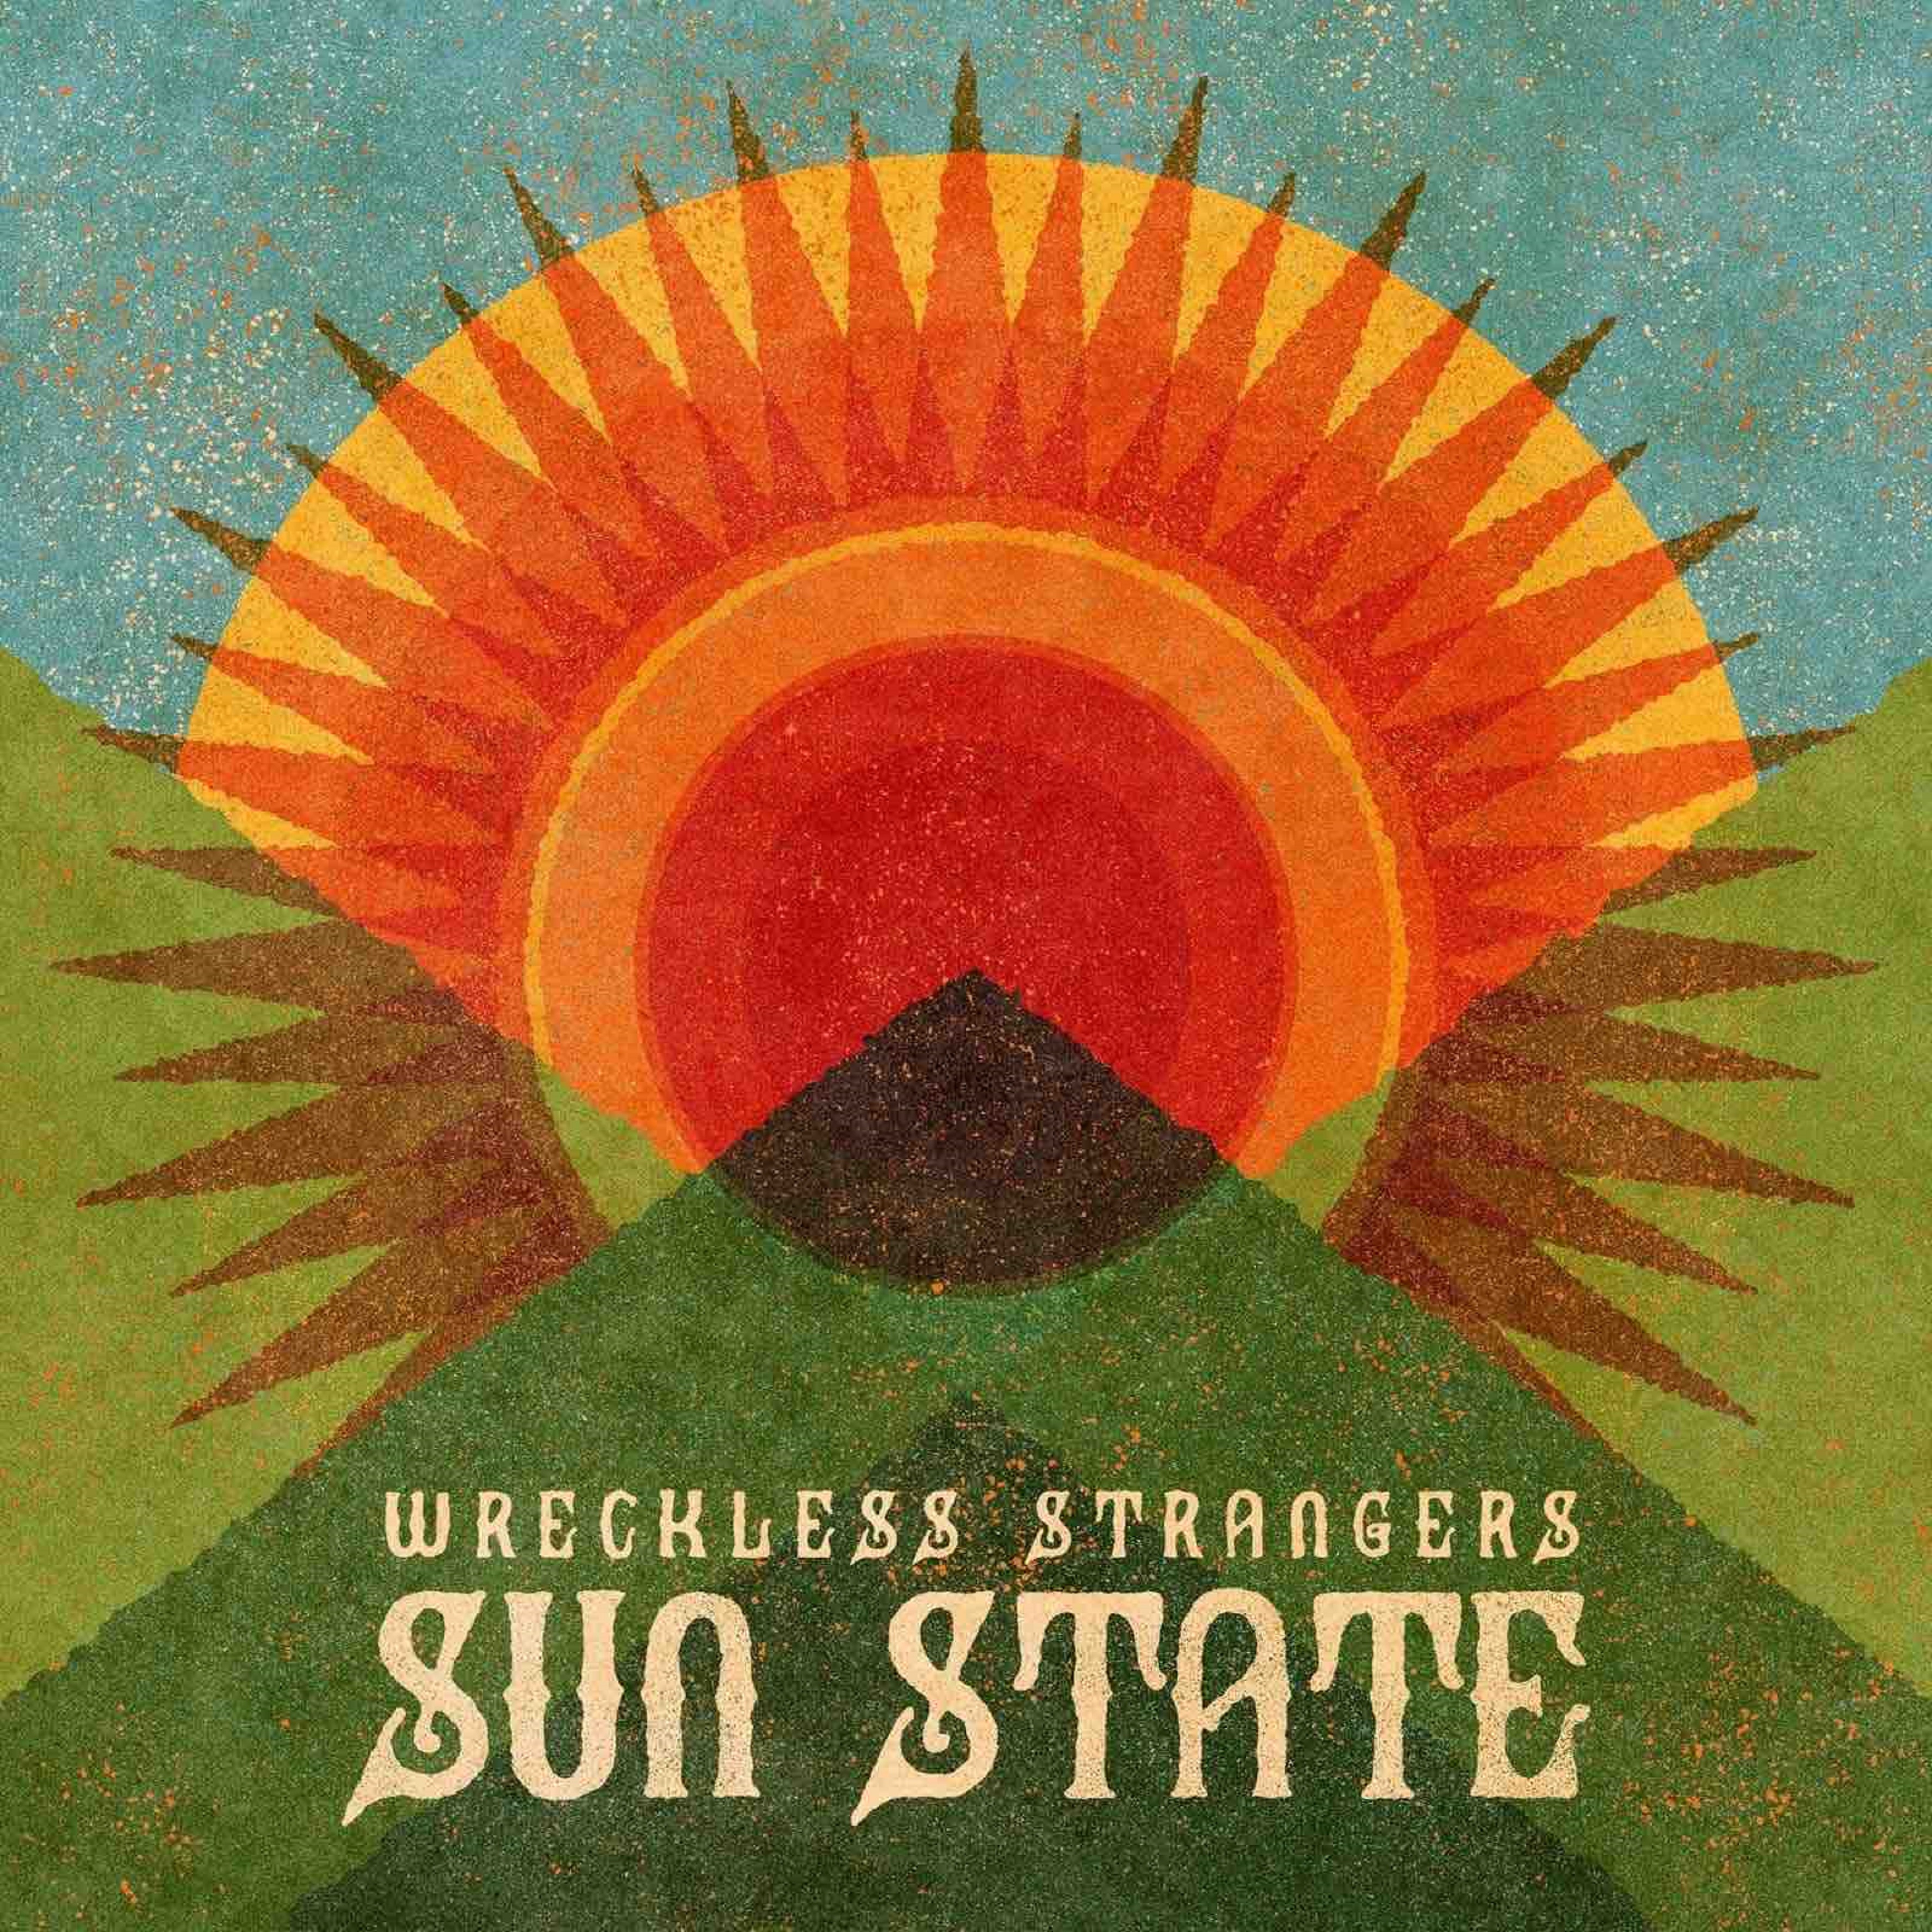 The Wreckless Strangers Release Debut Single “Sun State” and Announce Upcoming Record and Supporting Shows